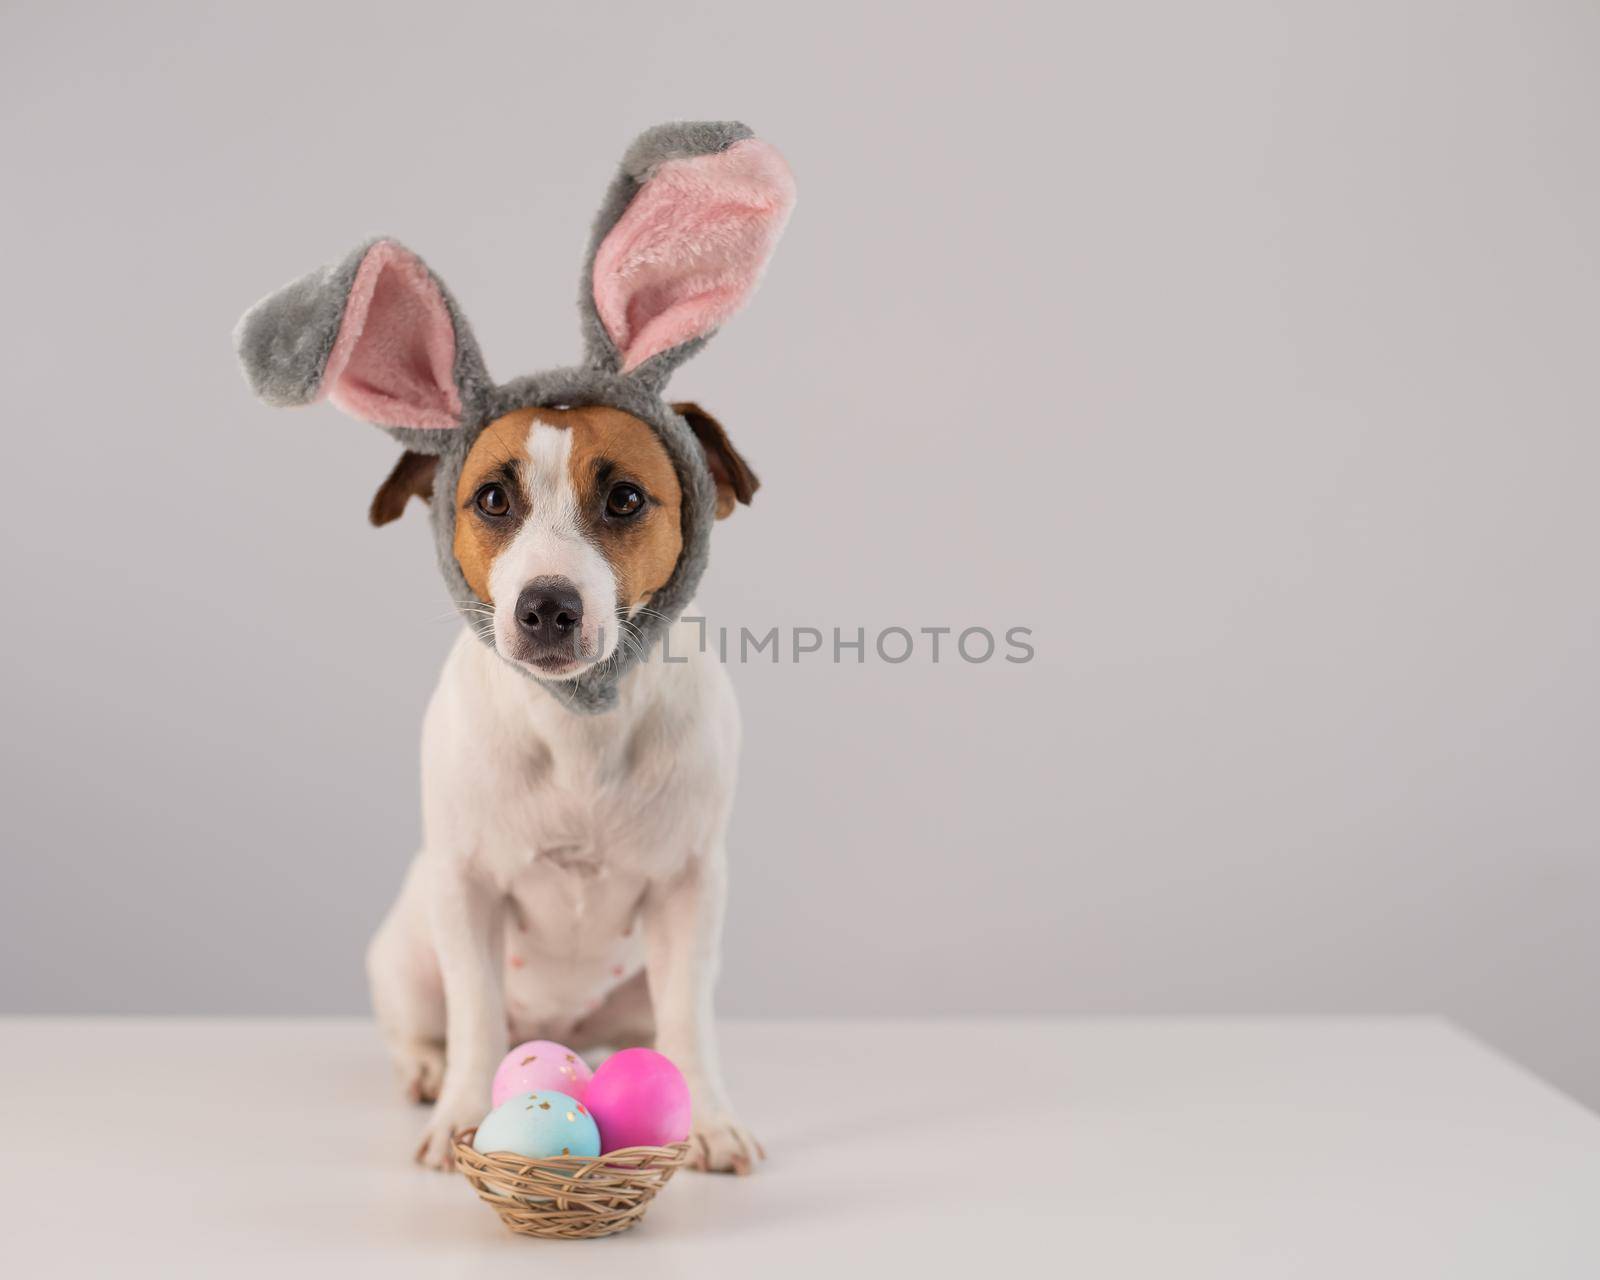 Funny dog Jack Russell Terrier in a bunny costume with a basket of painted eggs on a white background. Catholic Easter symbol by mrwed54